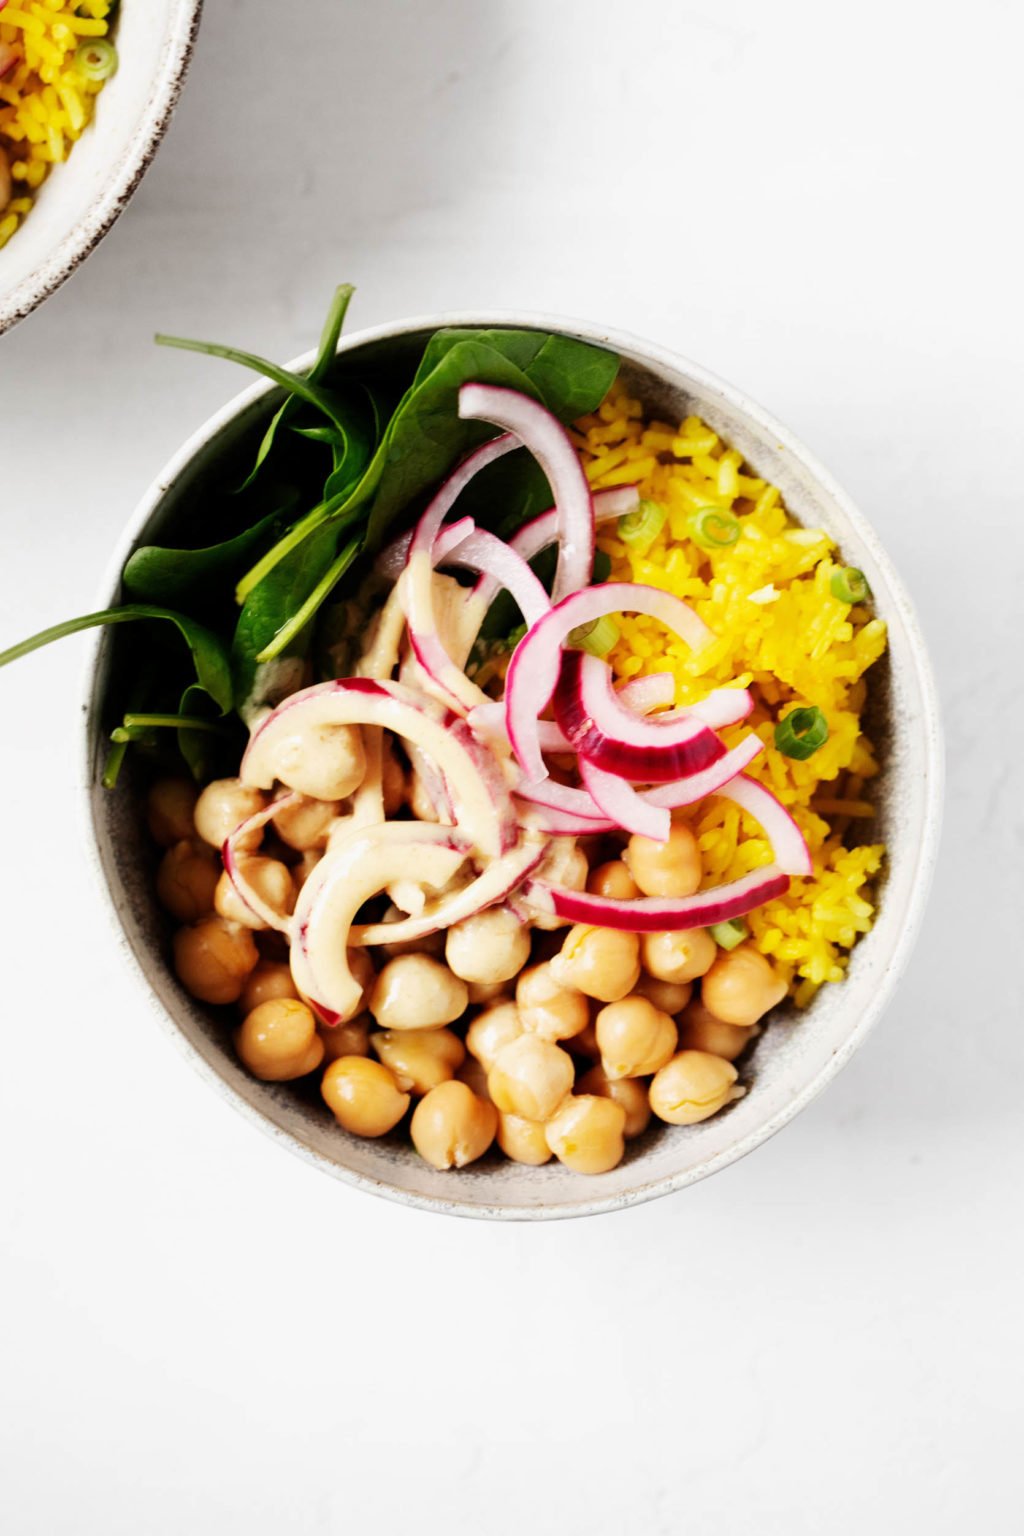 Turmeric rice bowls have been created with chickpeas, turmeric spiced rice, pickled onions, and greens. They're served in two white bowls.